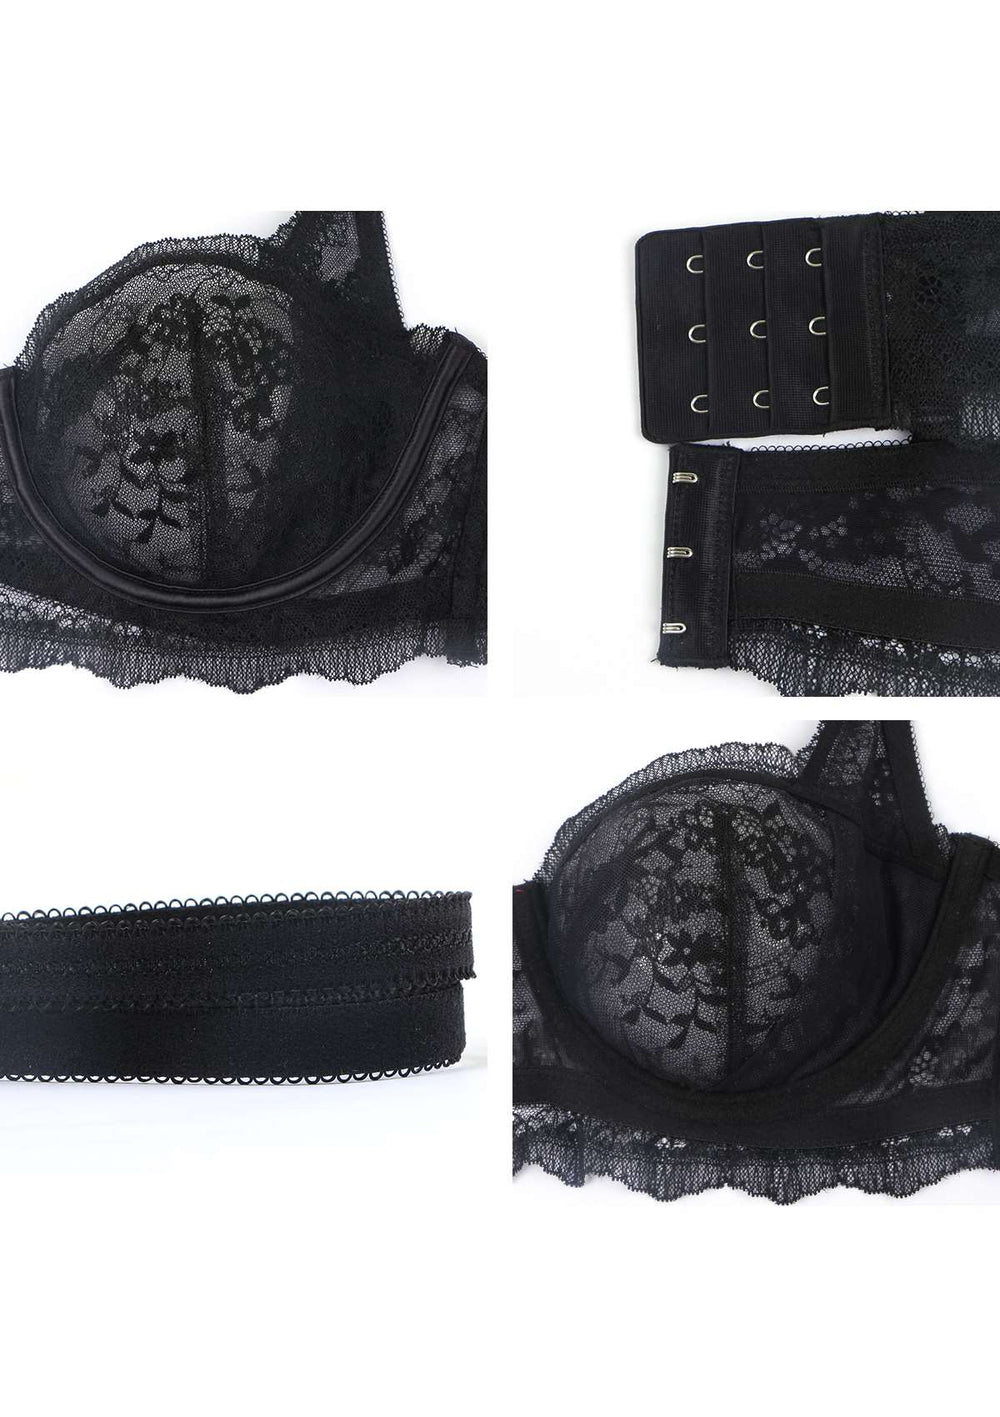 Black & White Floral Lace Push-Up Strapless Bra